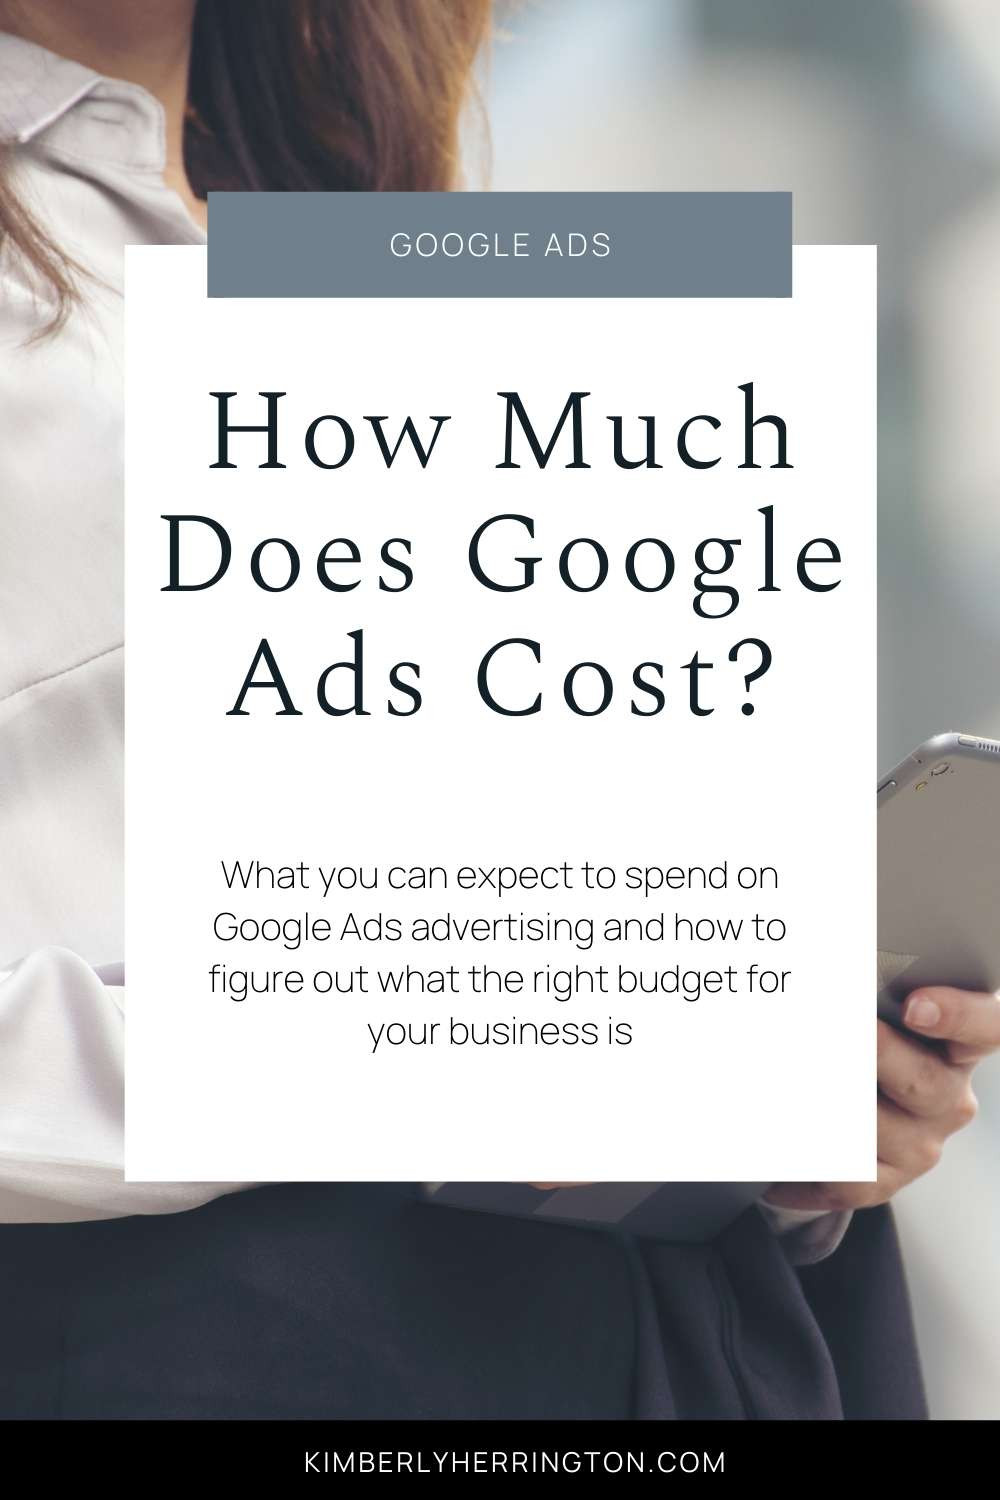 How Much Do Google Ads Cost? [2021]